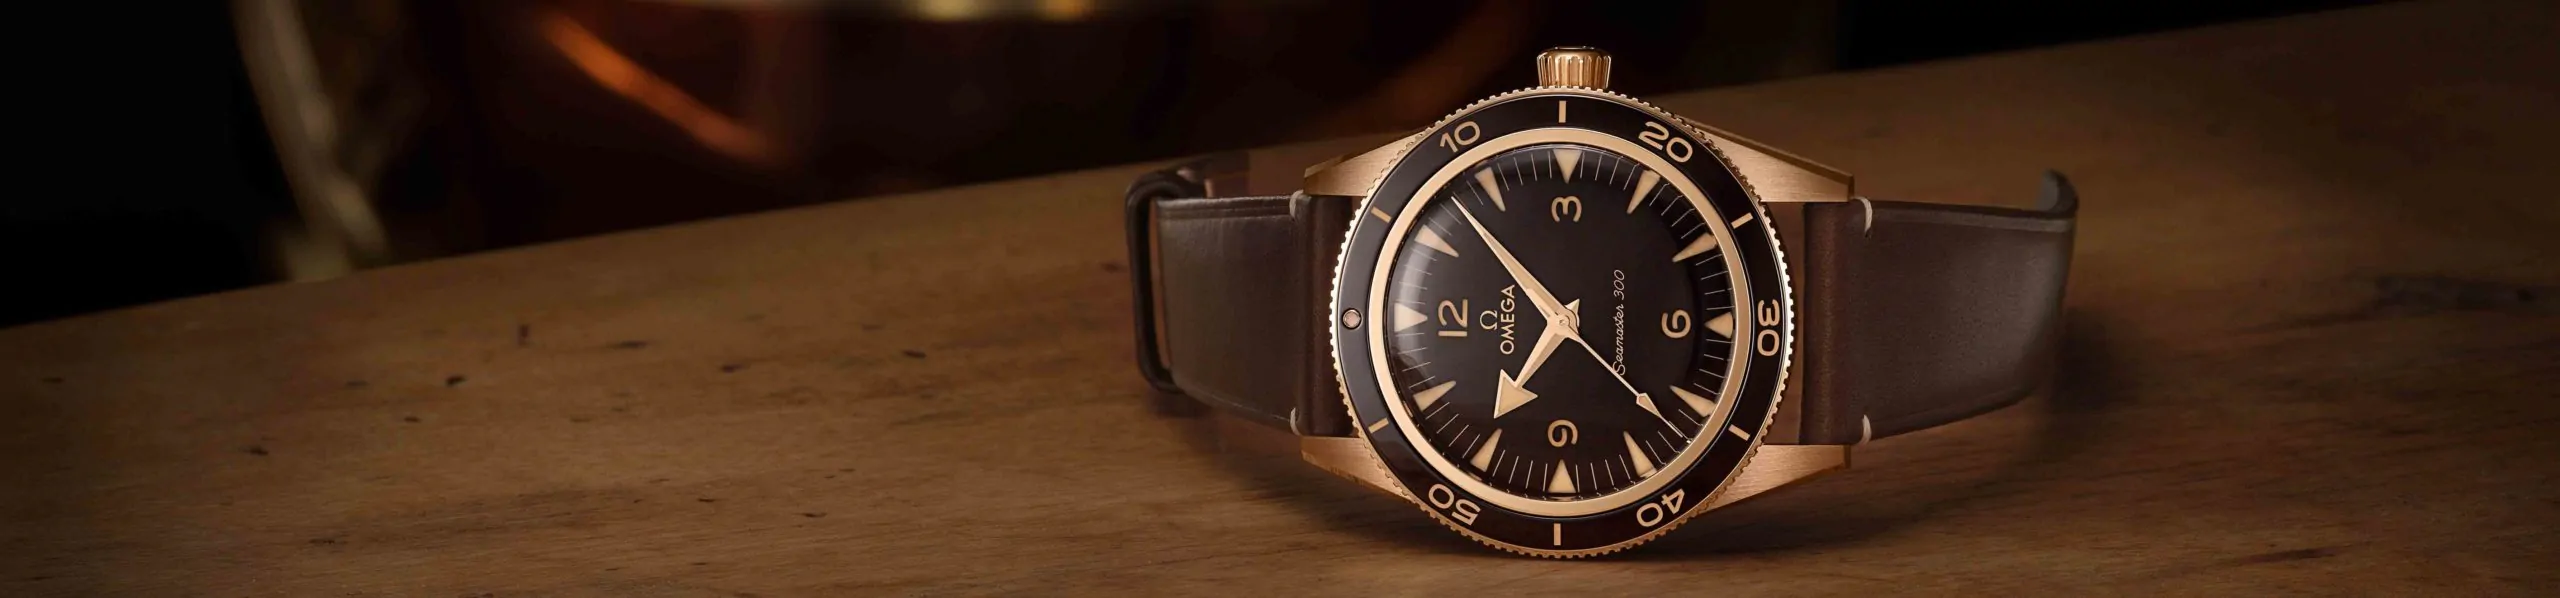 OMEGA Launches Extraordinary 2021 Watch Collection